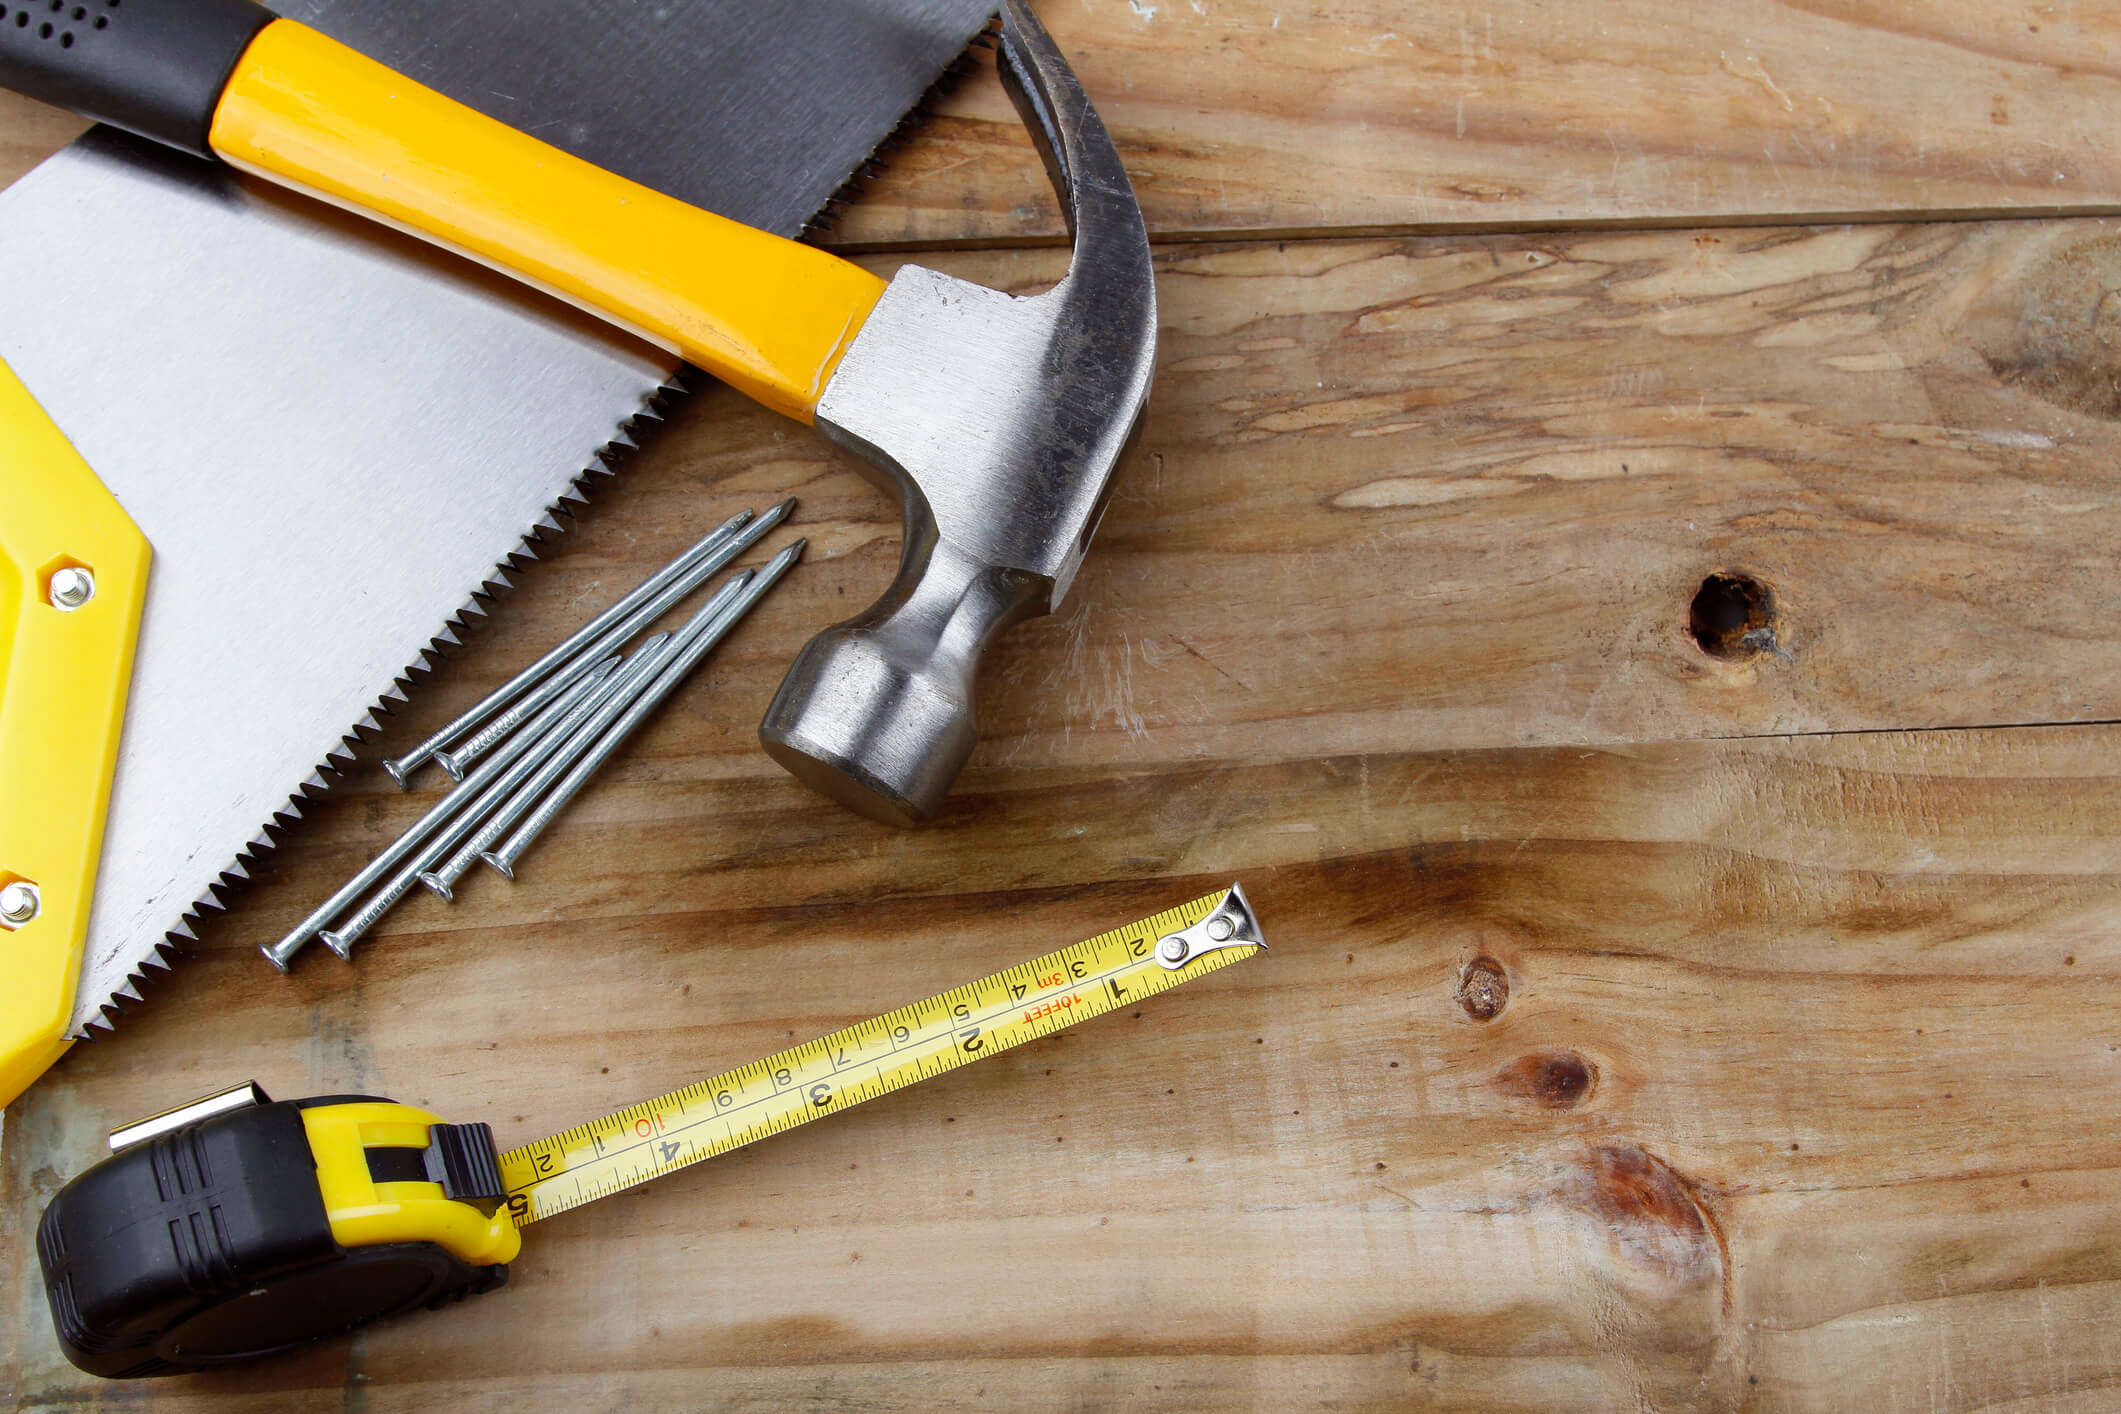 carious DIY tools like a hammer and nails and measuring tape on a wooden background